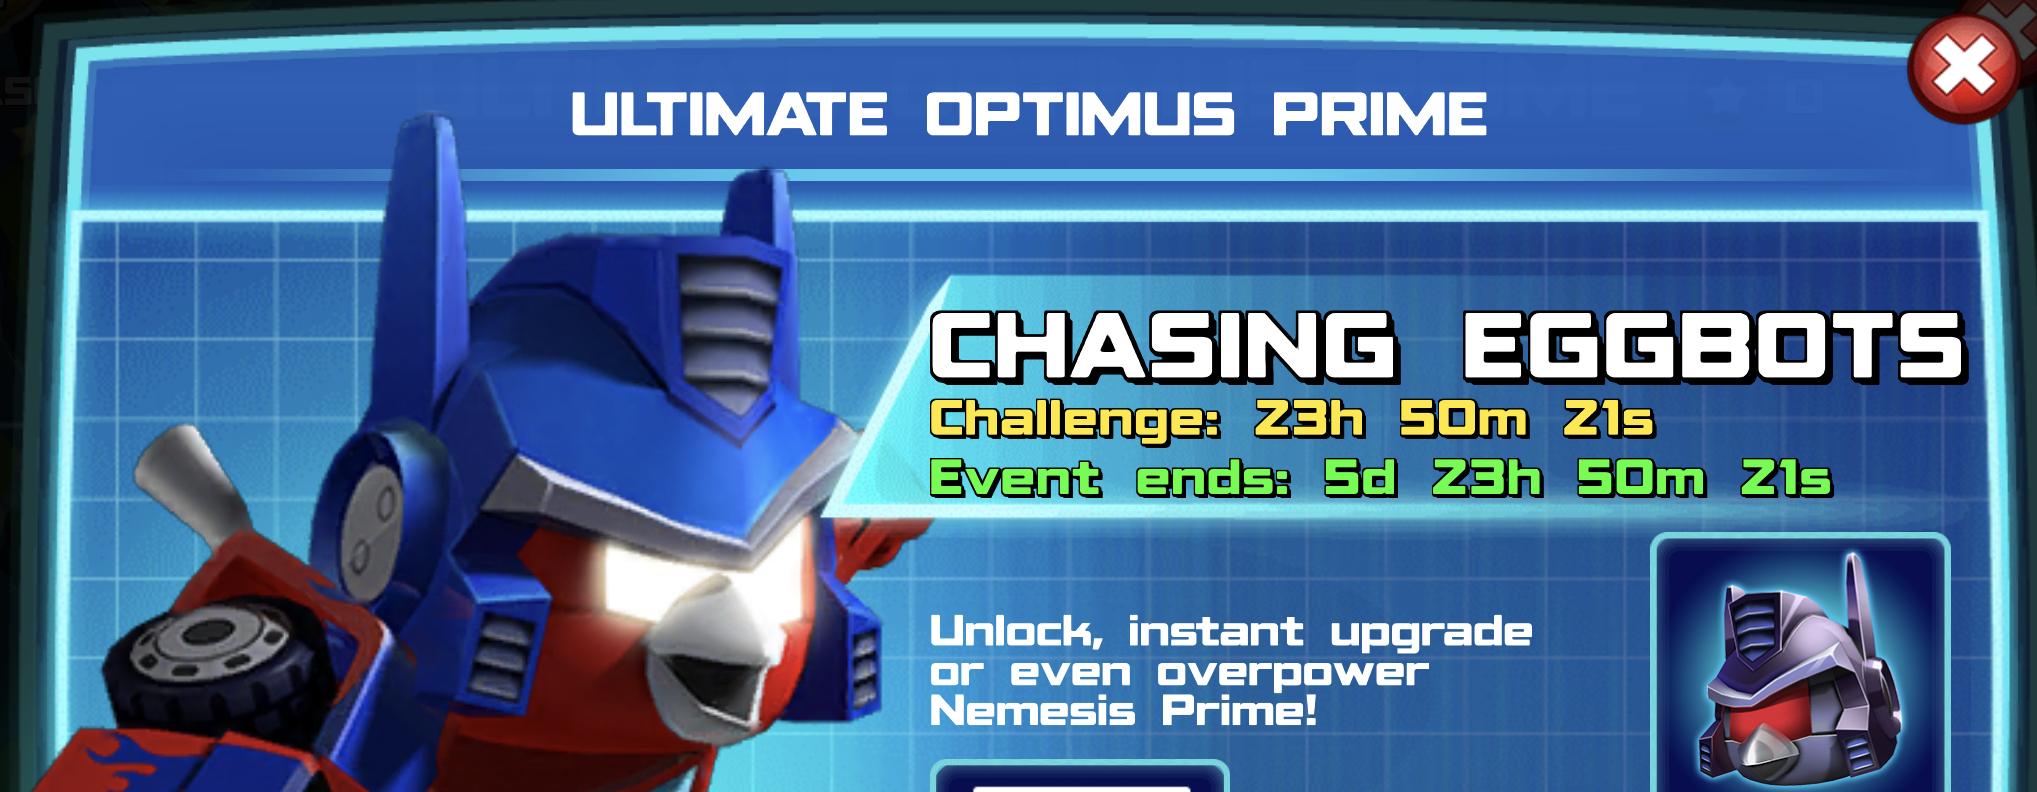 The event banner for Ultimate Optimus Prime